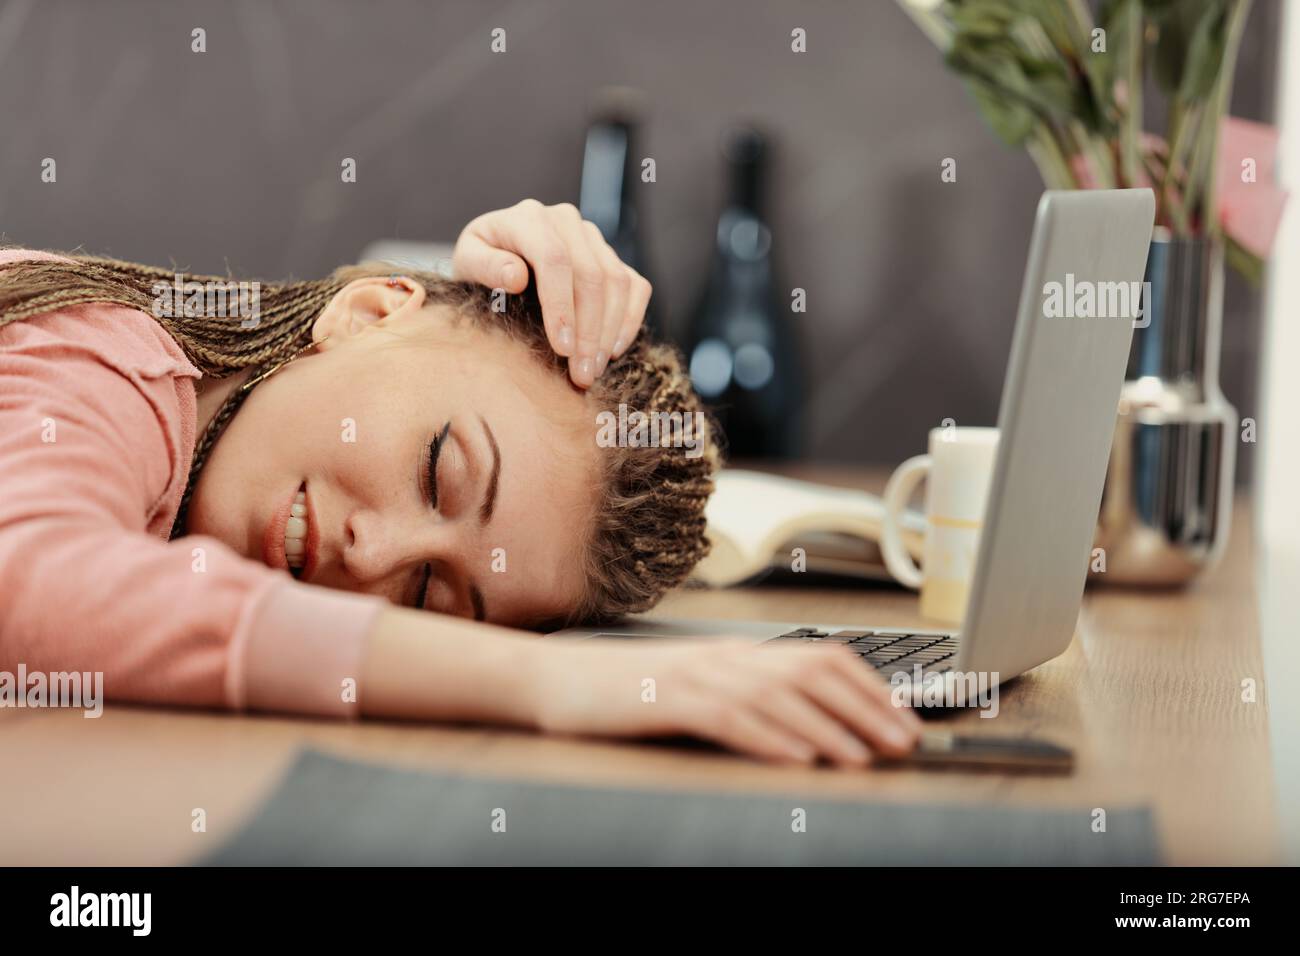 Exhausted from work or studying, a woman with box-braids falls asleep at her laptop, hand on phone Stock Photo